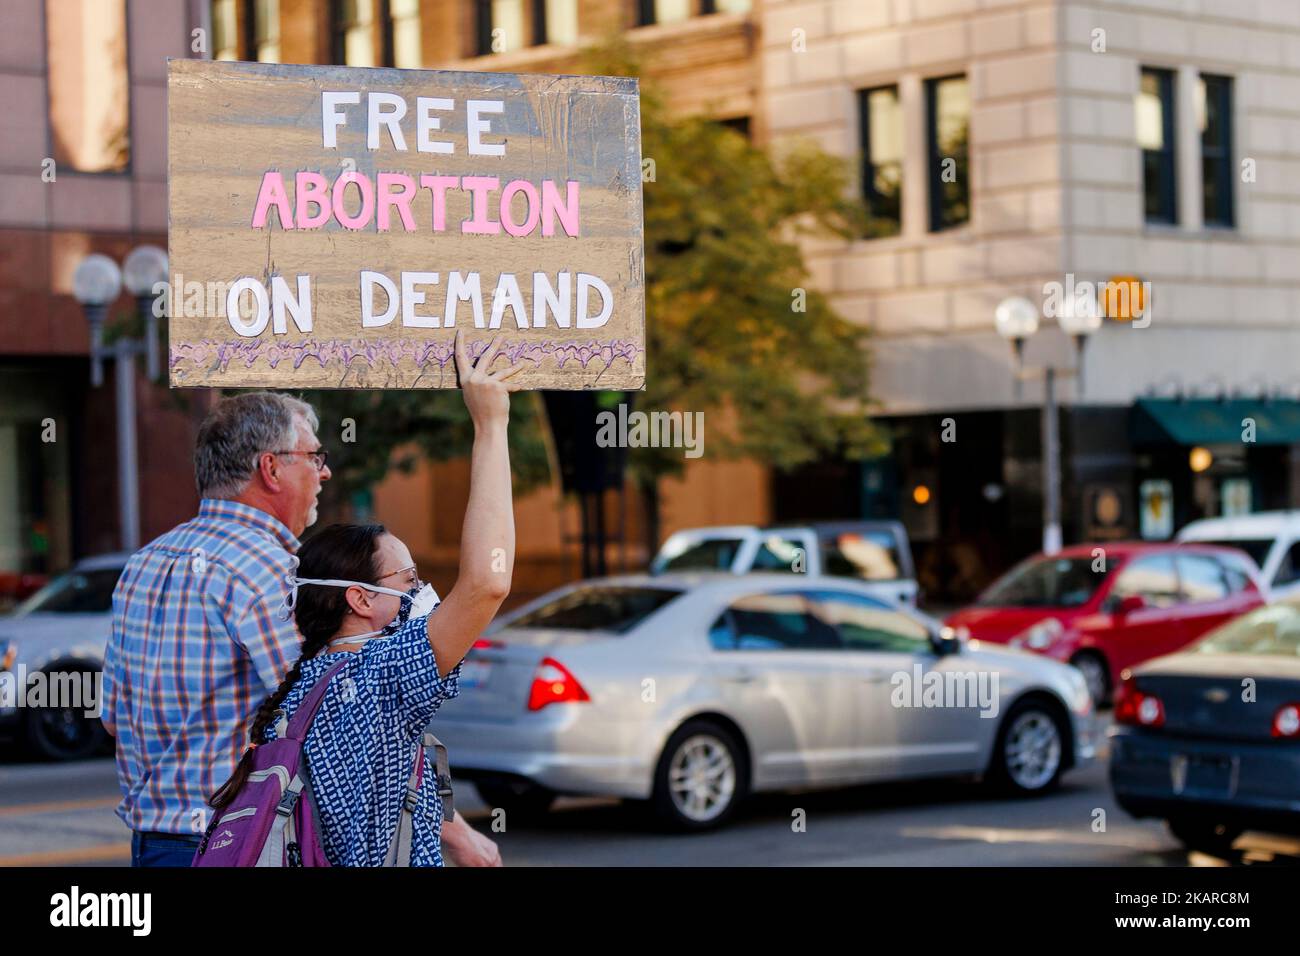 Abortion rights protesters stand by busy street holding a sign Stock Photo